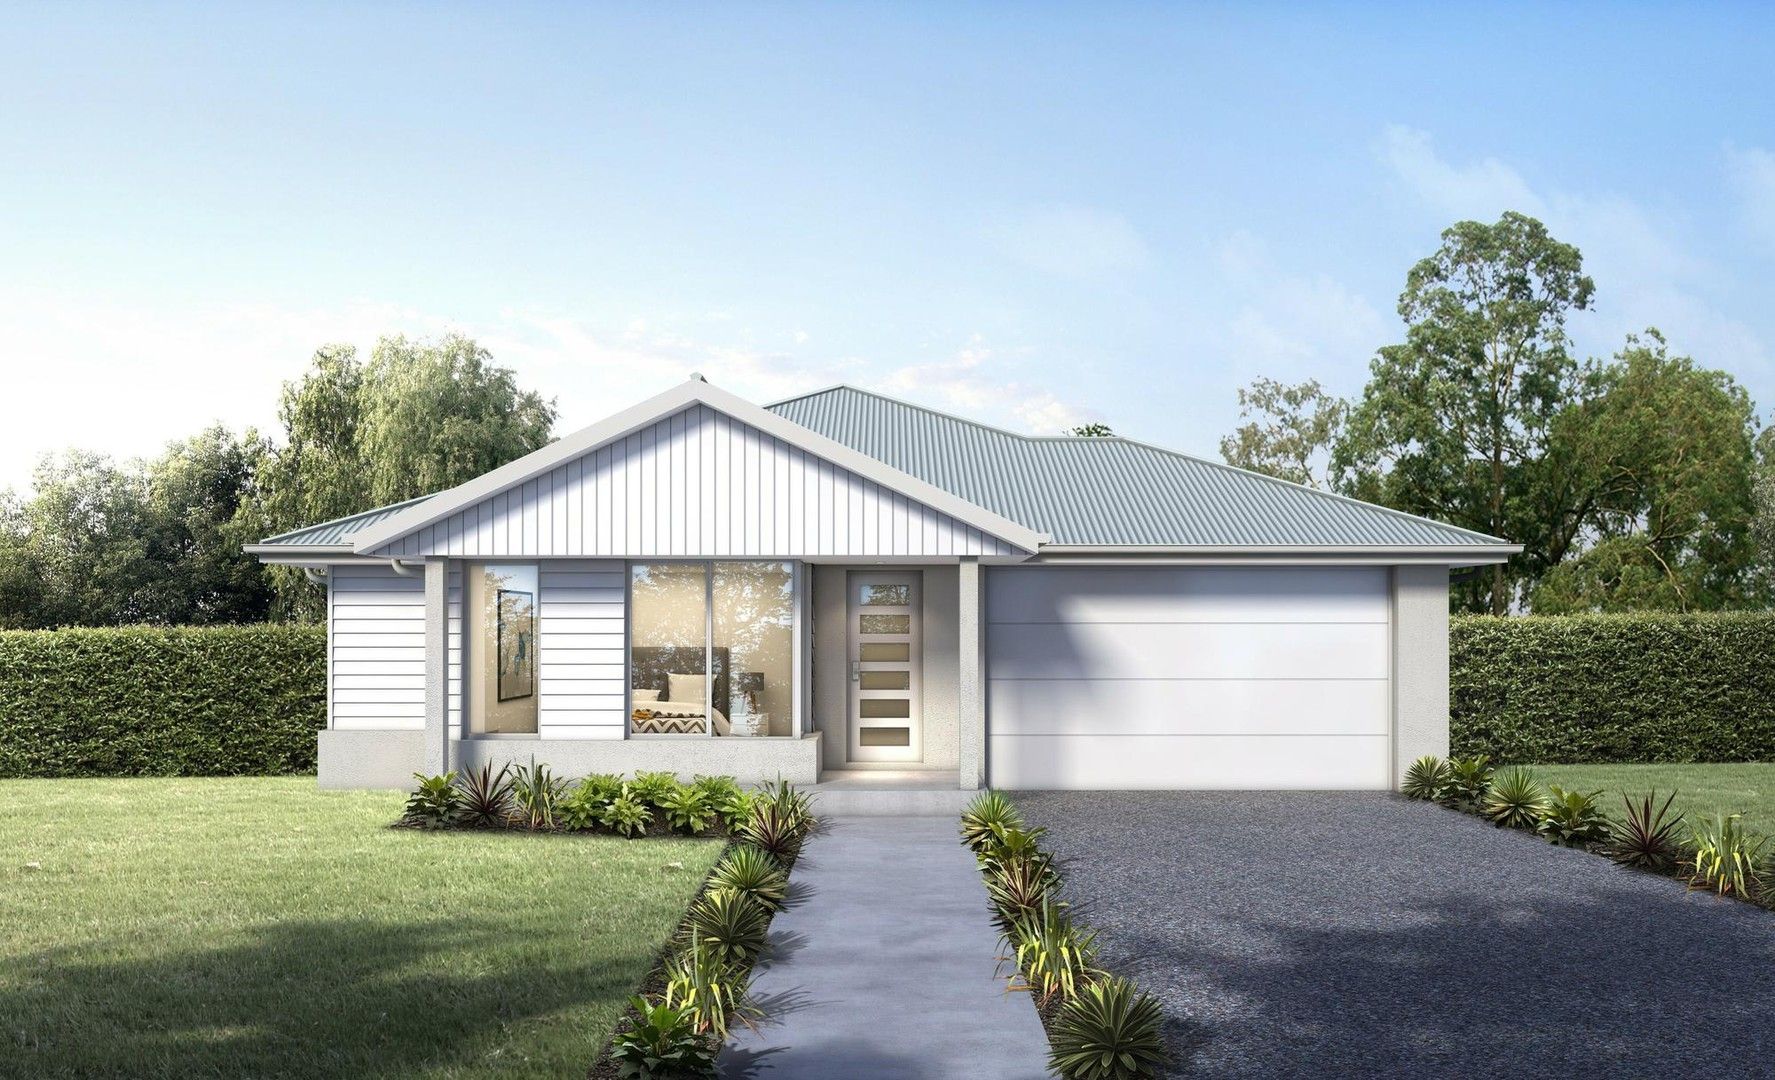 4 bedrooms New House & Land in 213 Gladstone Way CAMERON PARK NSW, 2285